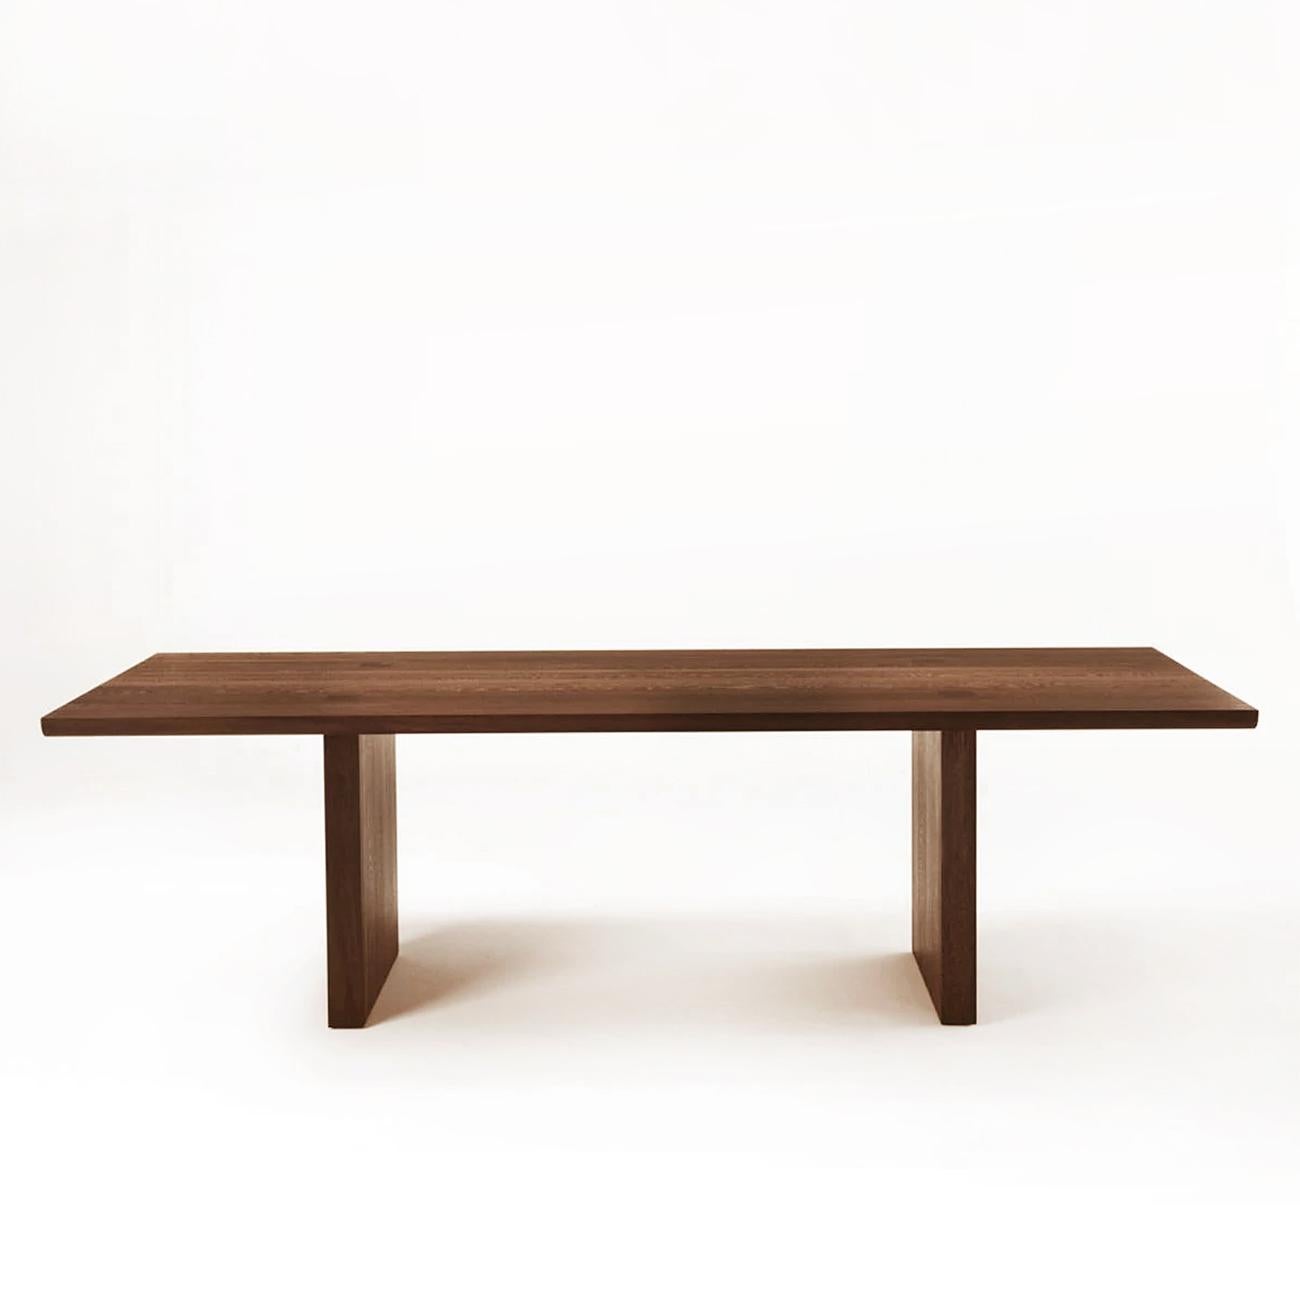 Dining table Theos in solid walnut wood, with a gap in the
middle of the top, with visible squares feet's fixations
on the top. With rounded edges.
Also available in solid oak, on request.
Available in:
L180xD100xH75cm, price: